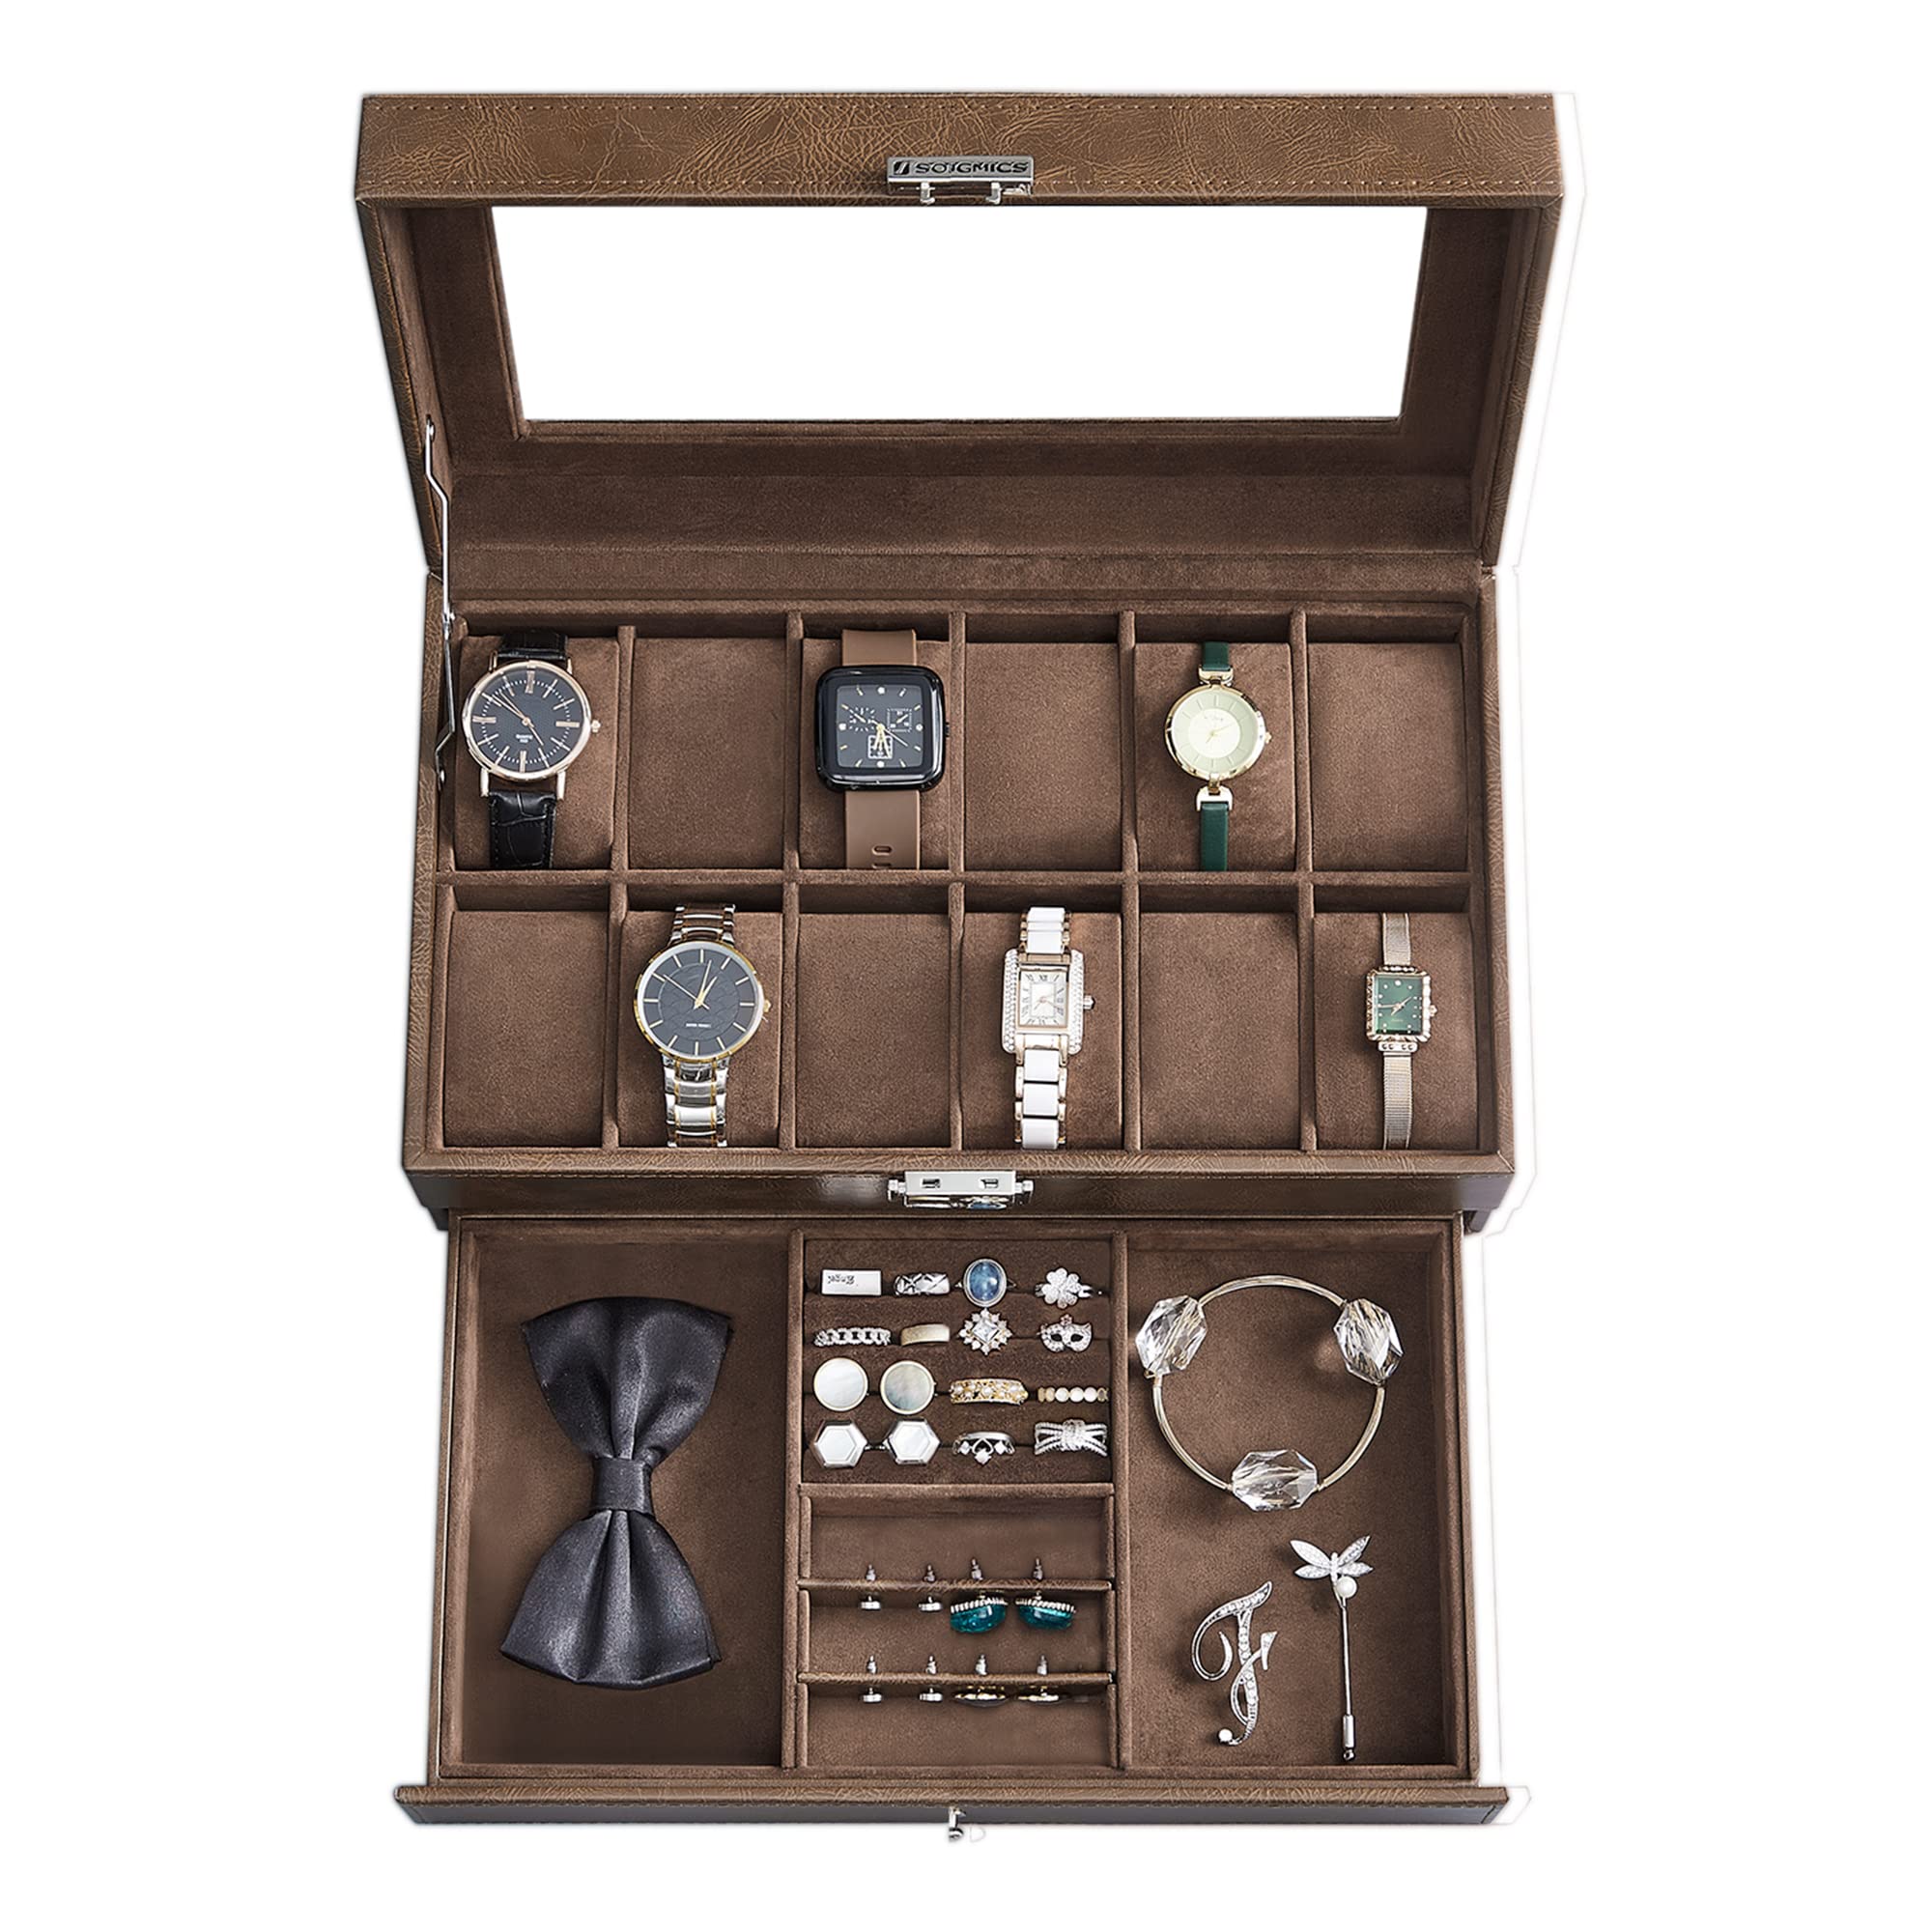 SONGMICS 12-Slot Watch Box, Lockable Watch Case with Glass Lid, 2 Layers, with 1 Drawer for Rings, Bracelets, Gift Idea, Brown Synthetic Leather, Brown Lining UJWB012K01